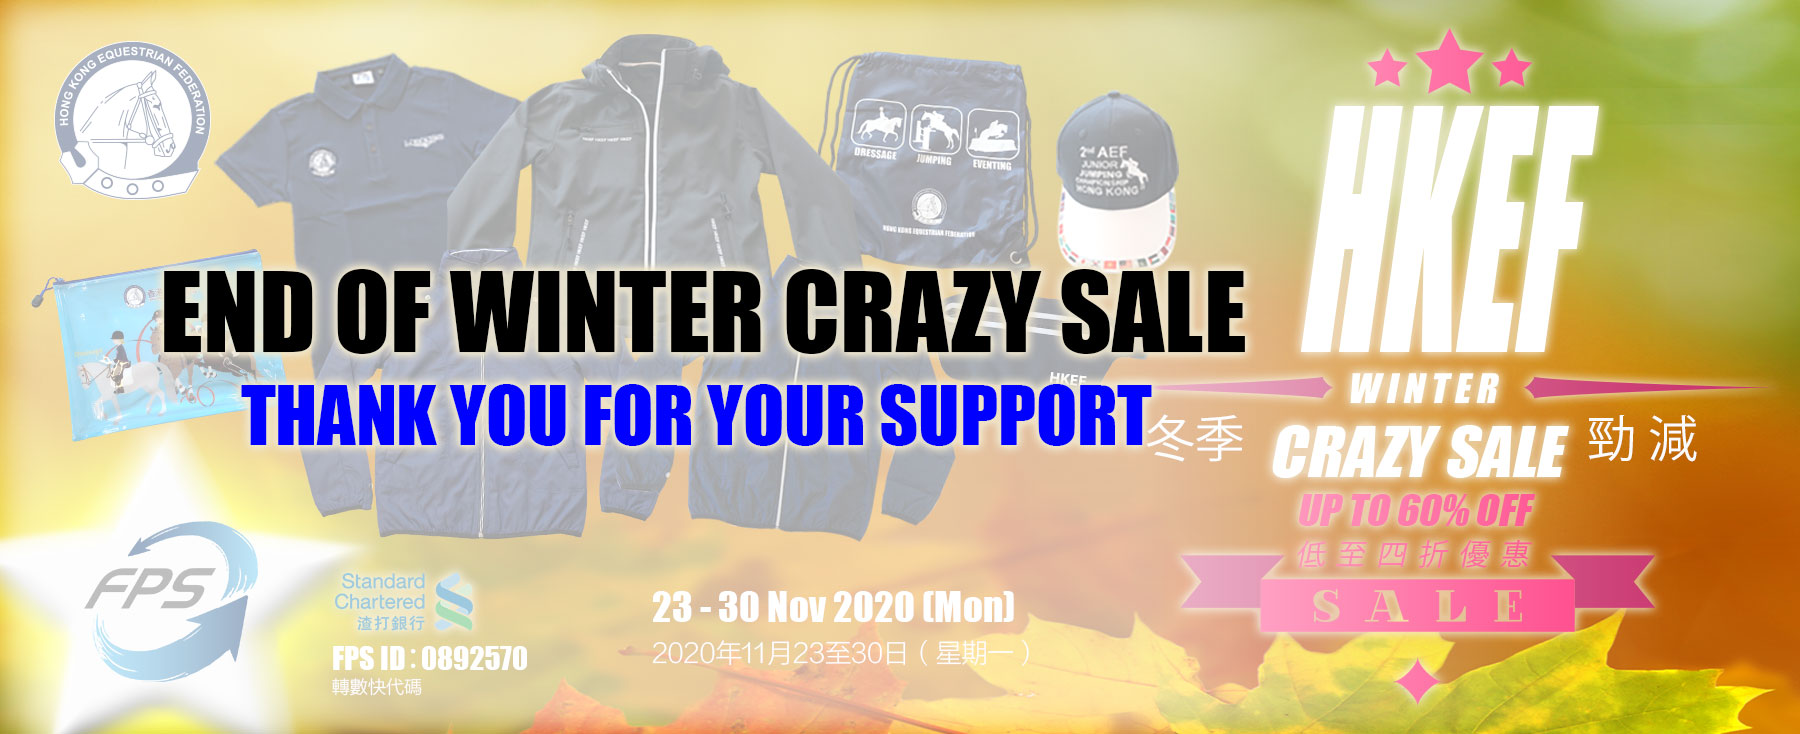 End-of-Winter-Crazy-Sale